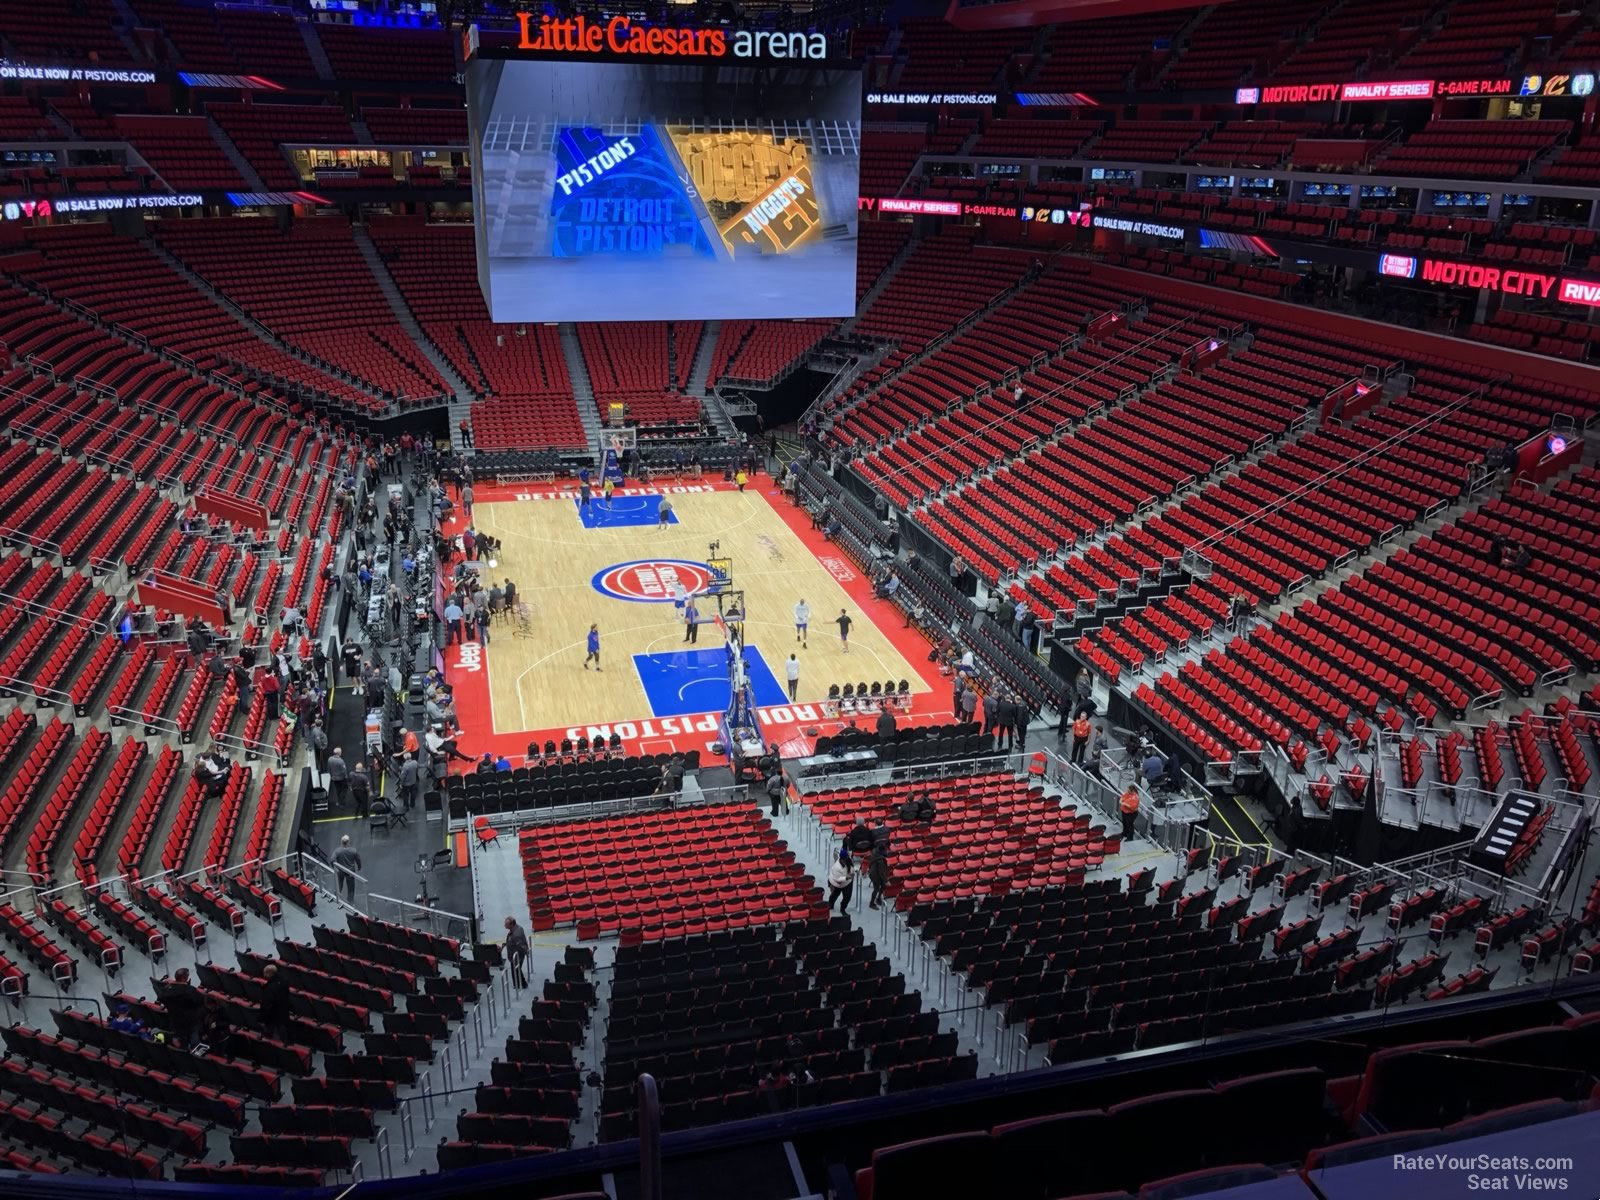 mezzanine 20, row 2 seat view  for basketball - little caesars arena